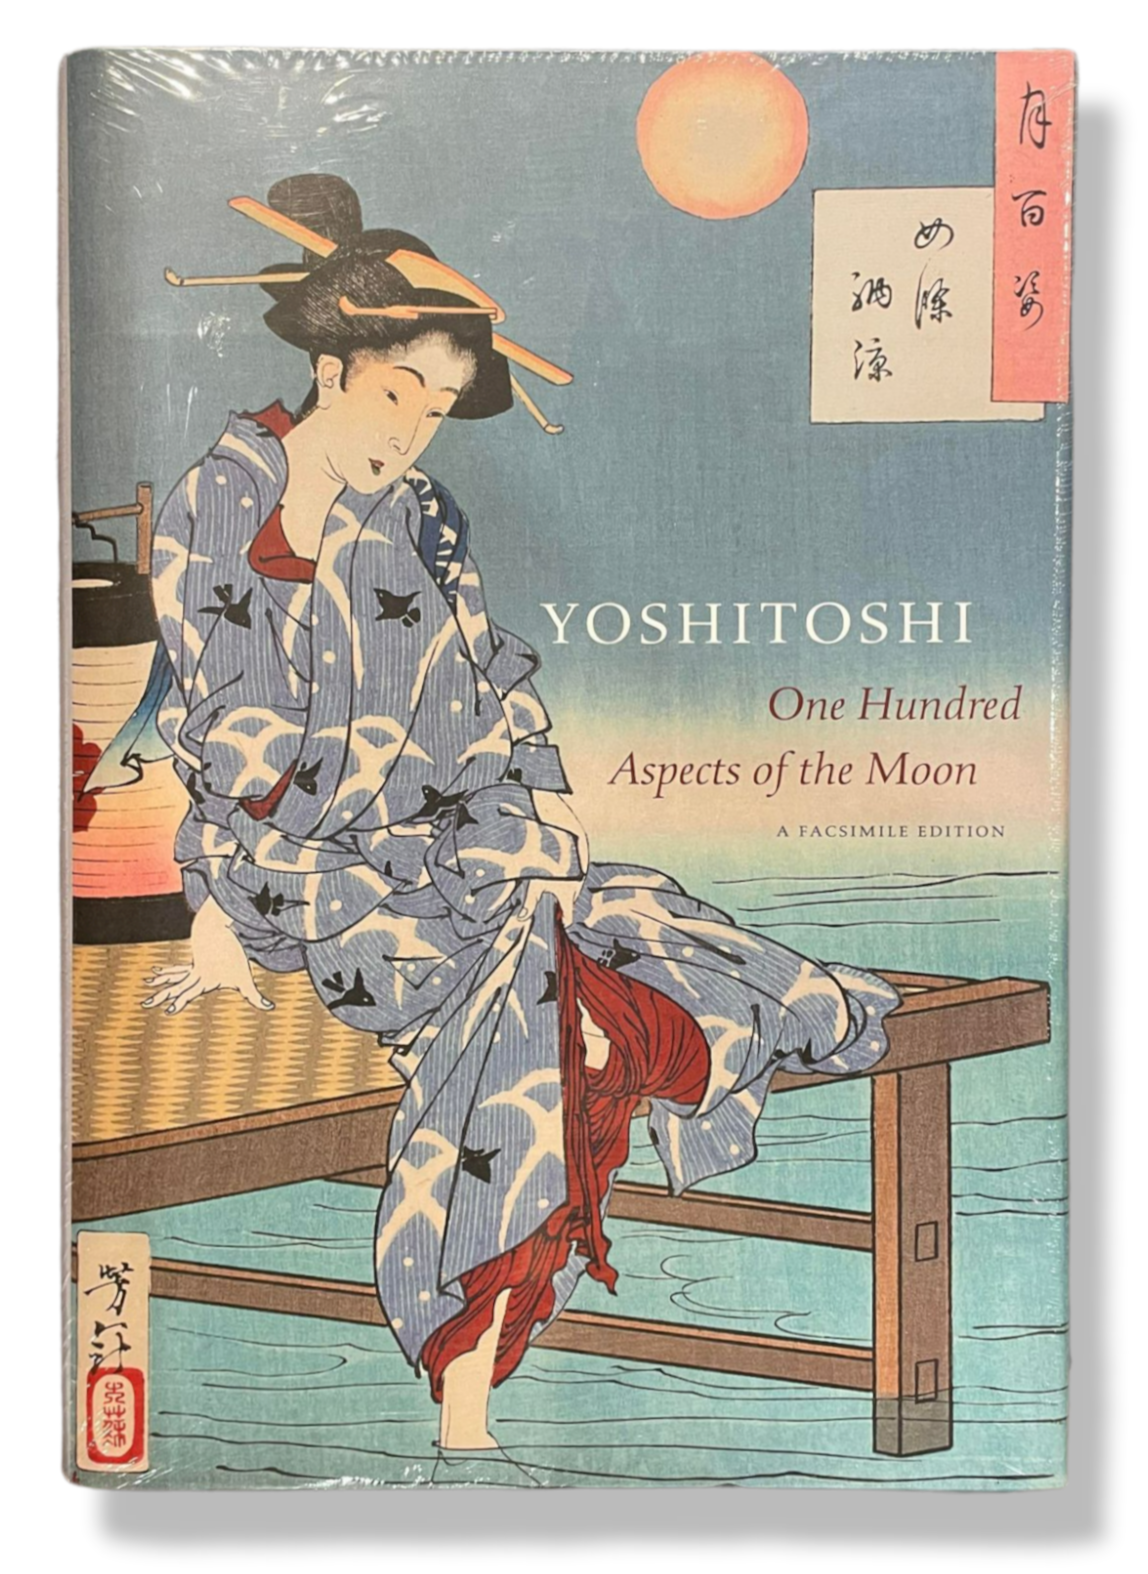 Yoshitoshi - One Hundred Aspects of the Moon